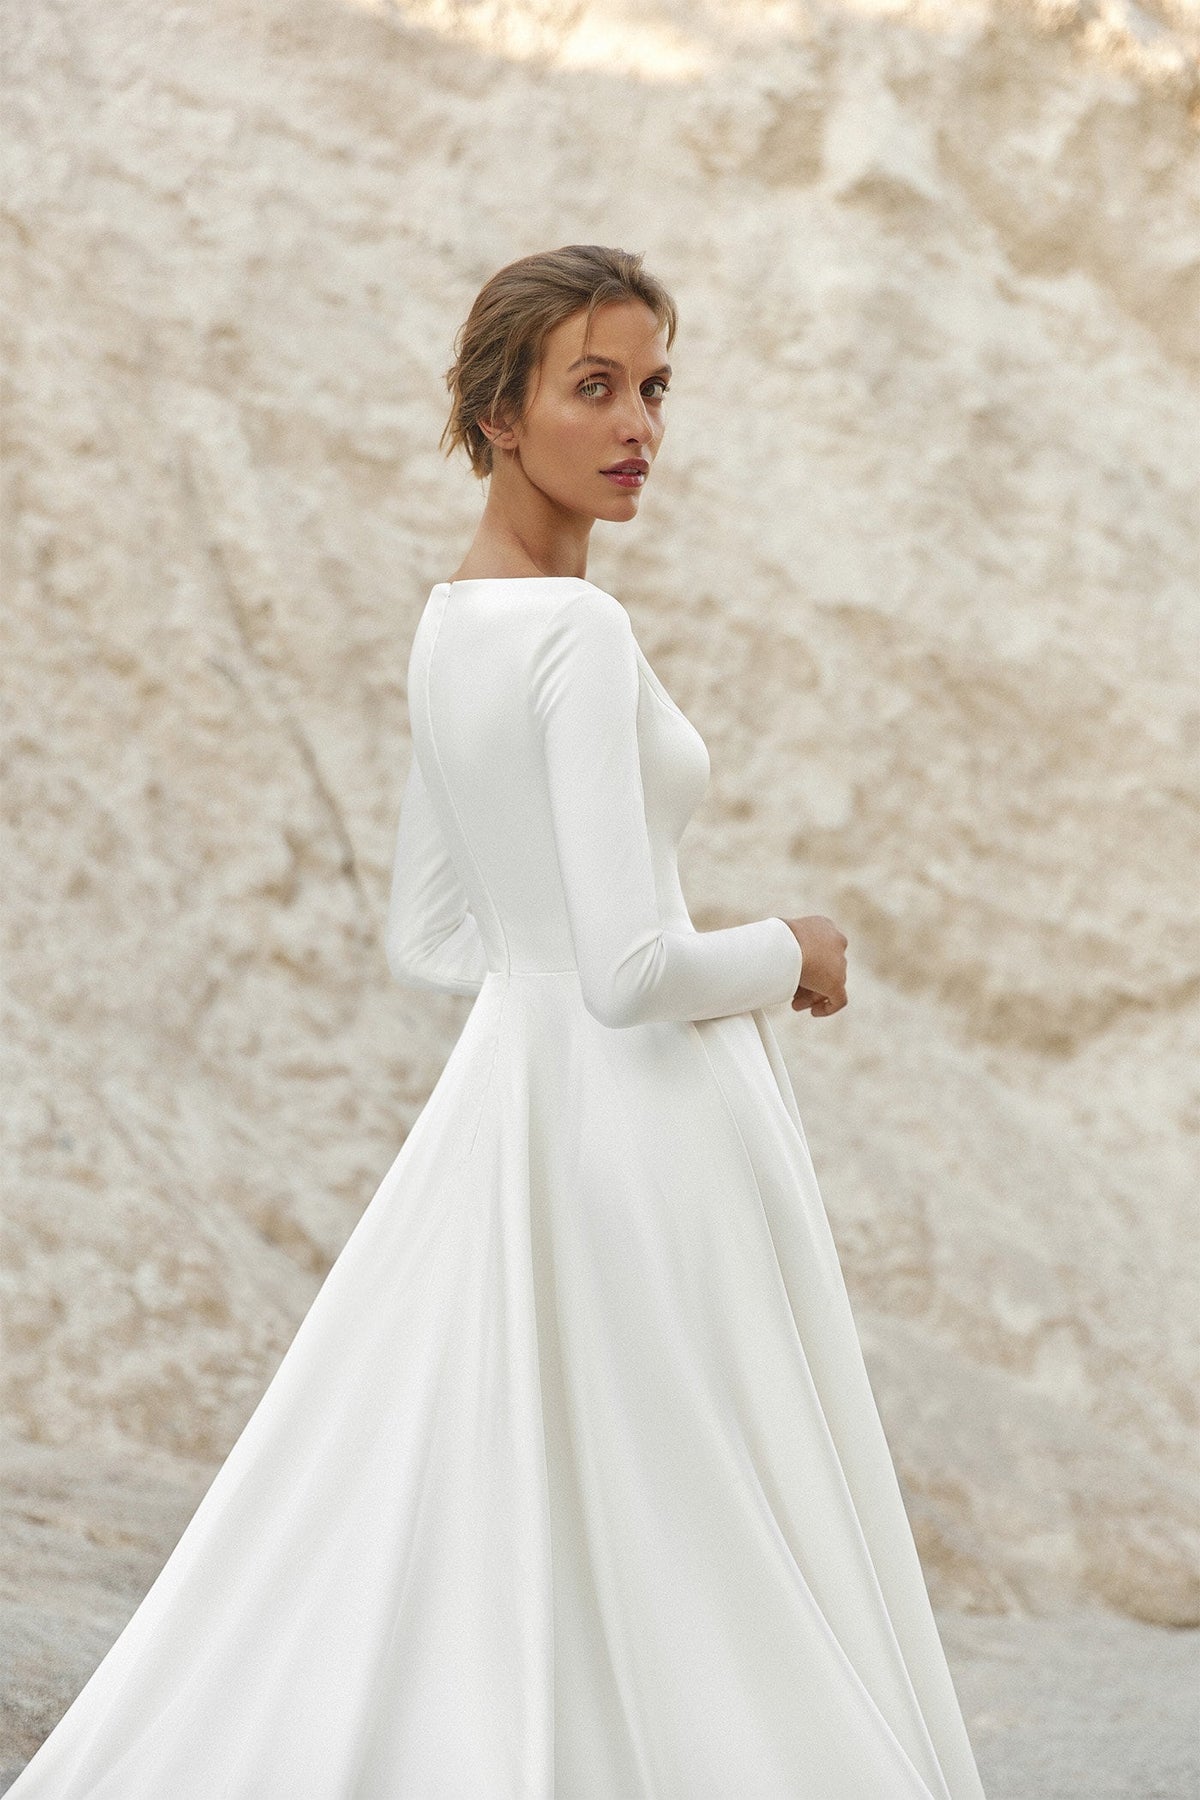 Simple Classic Modest Boatneck Long Fitted Sleeve High Neckline Closed Back Wedding Dress Bridal Gown LDS Long Train Zipper Back Minimalist